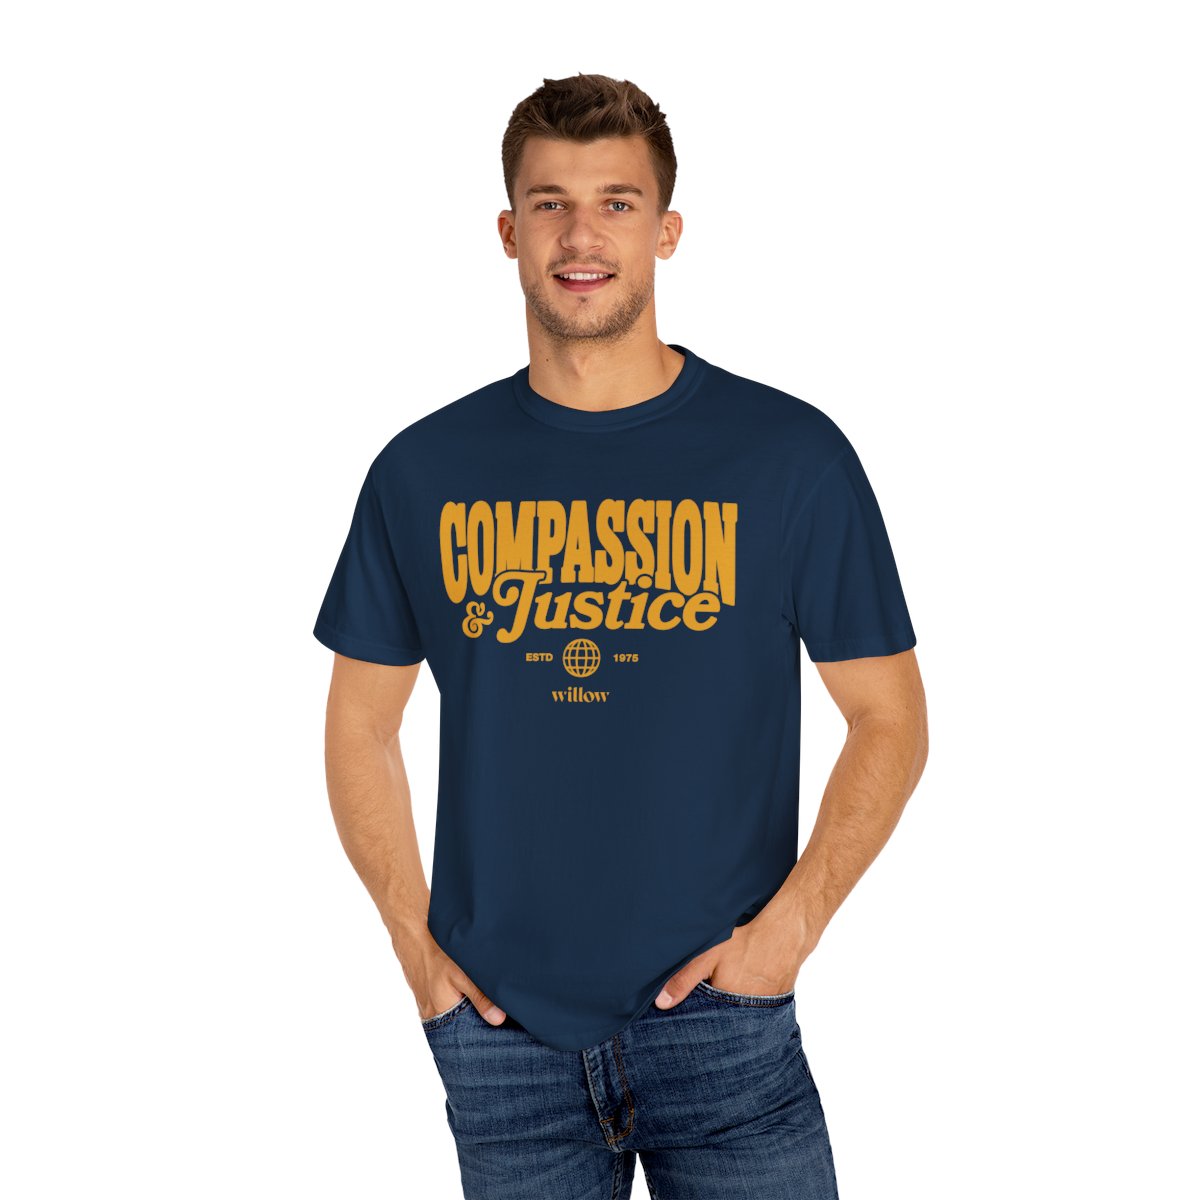 Compassion & Justice T-Shirt product thumbnail image